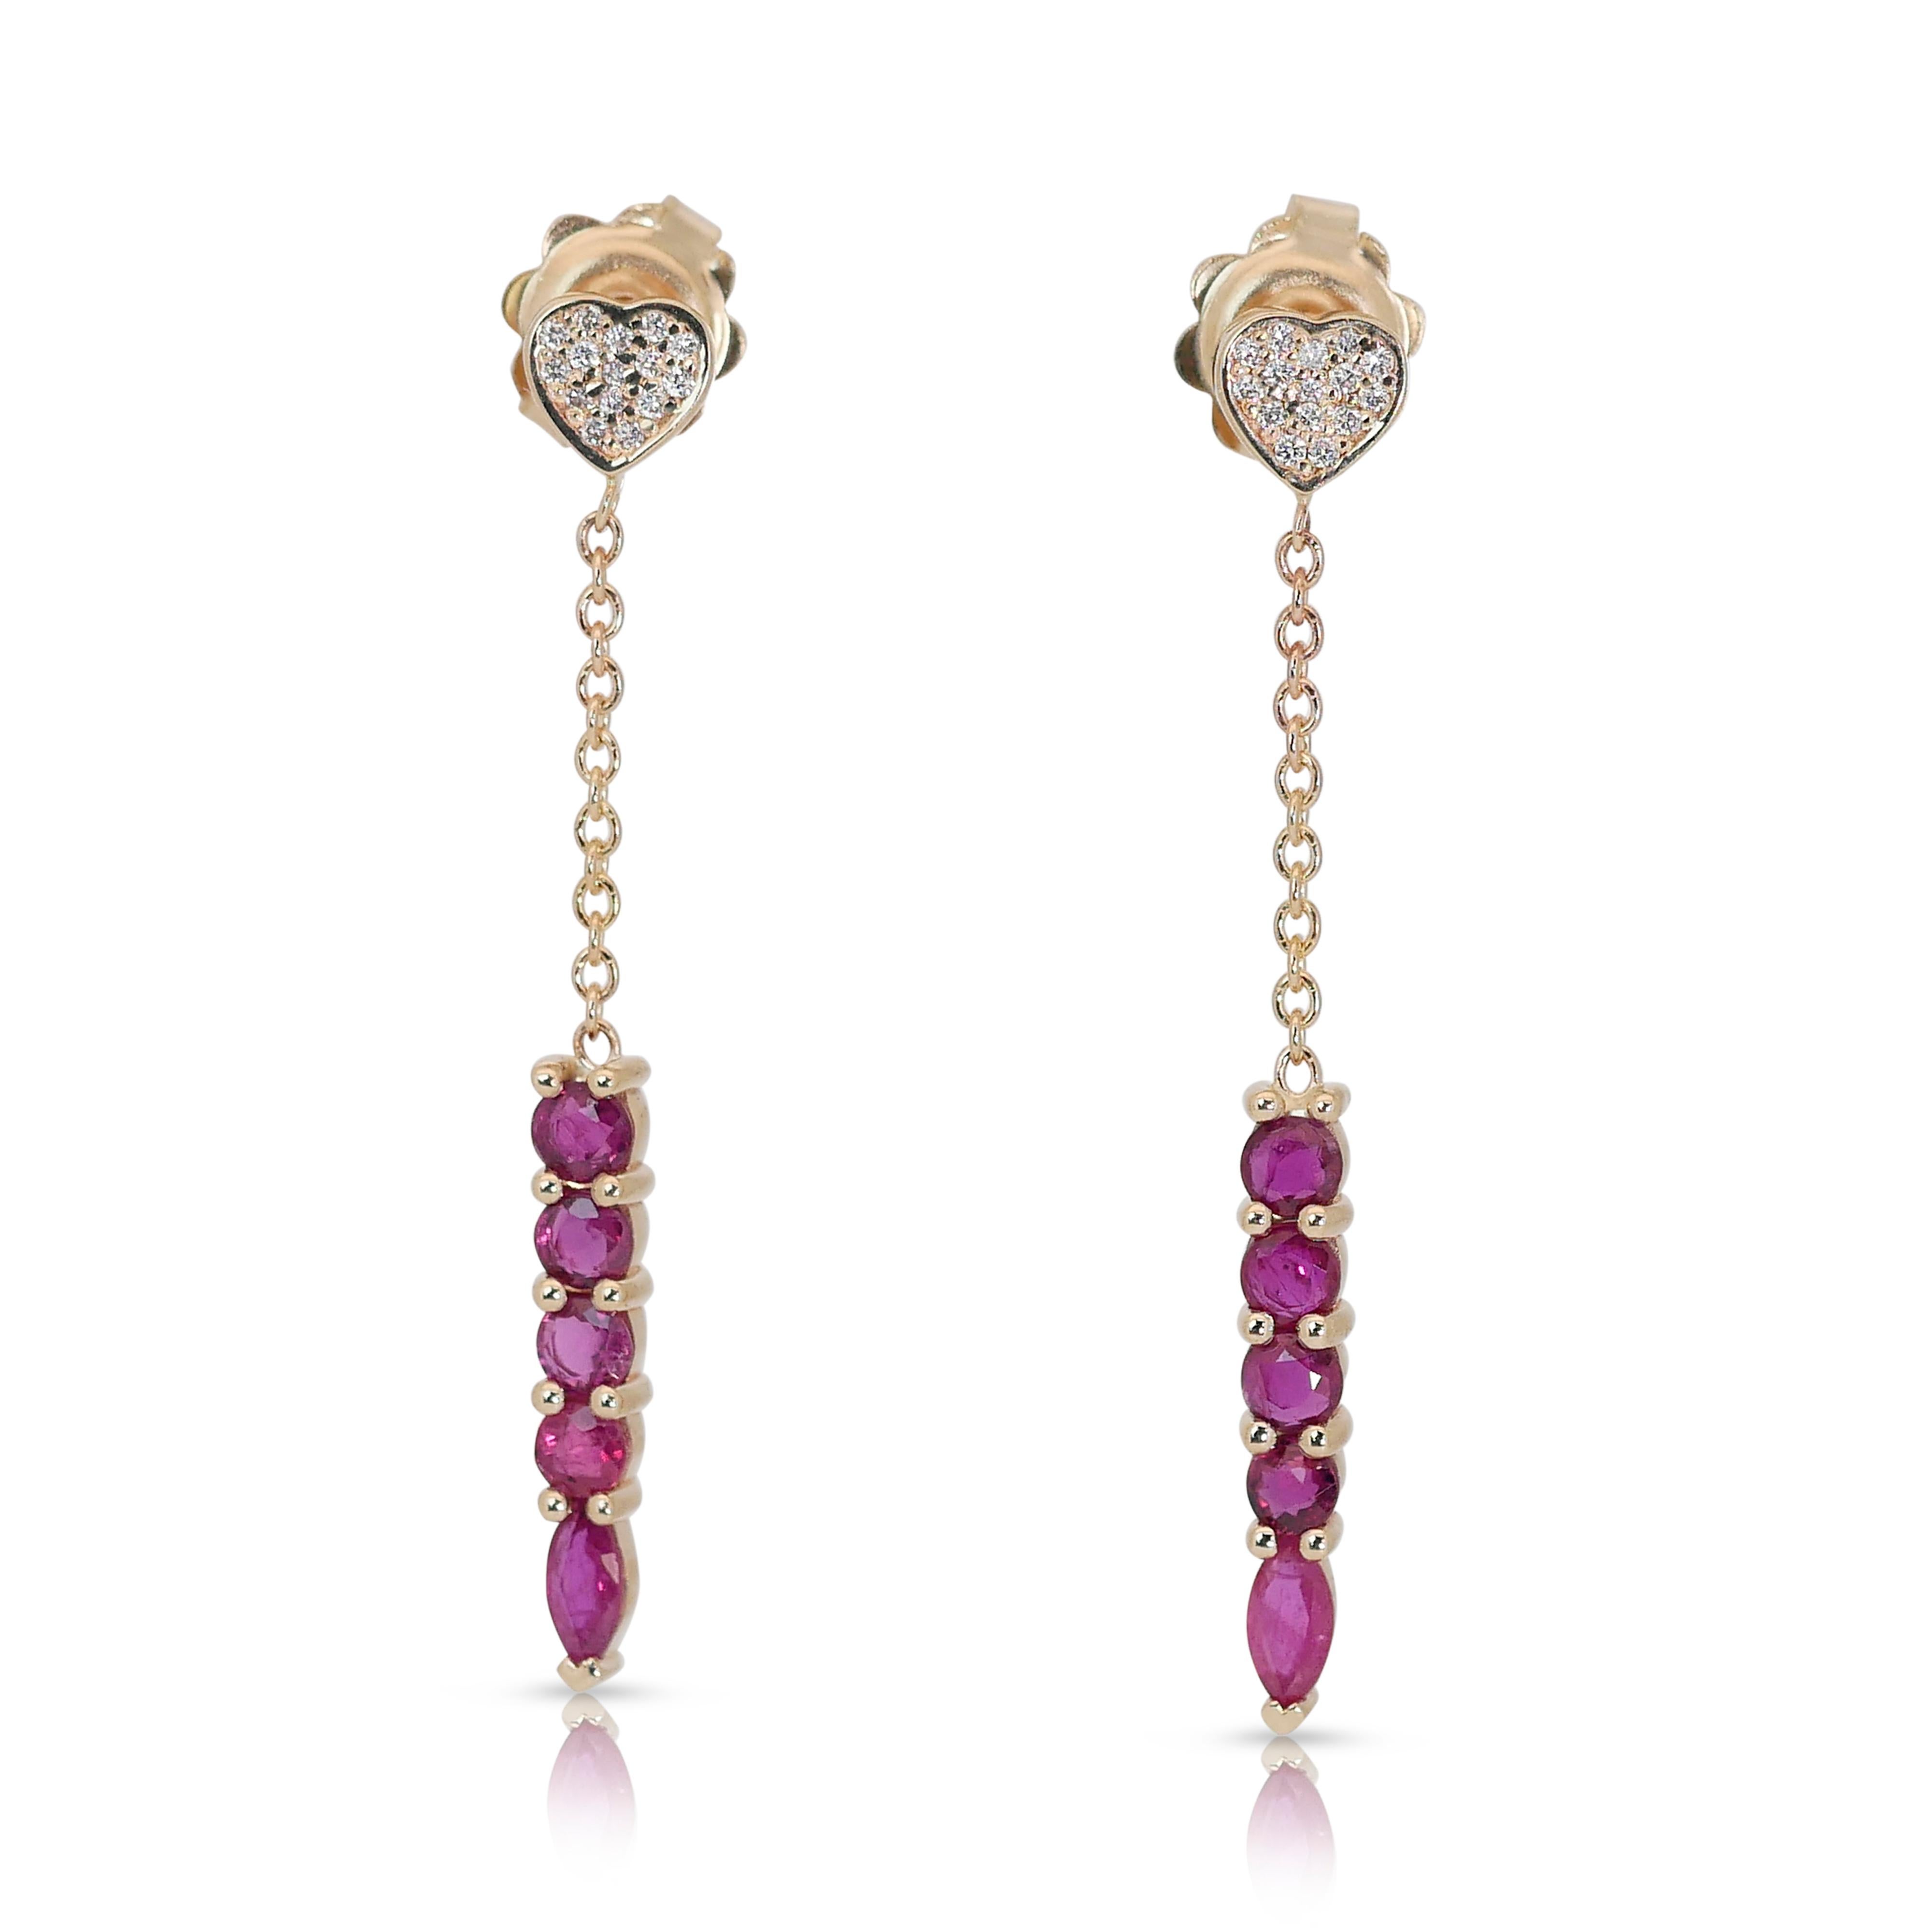 Lovely 14k Yellow Gold Ruby and Diamond Drop Earrings w/1.15 ct - IGI Certified

These earrings feature a harmonious arrangement of 8 round rubies, totaling 0.80 ct, their hues transitioning from purple red to purplish red. Adding to the allure, 30